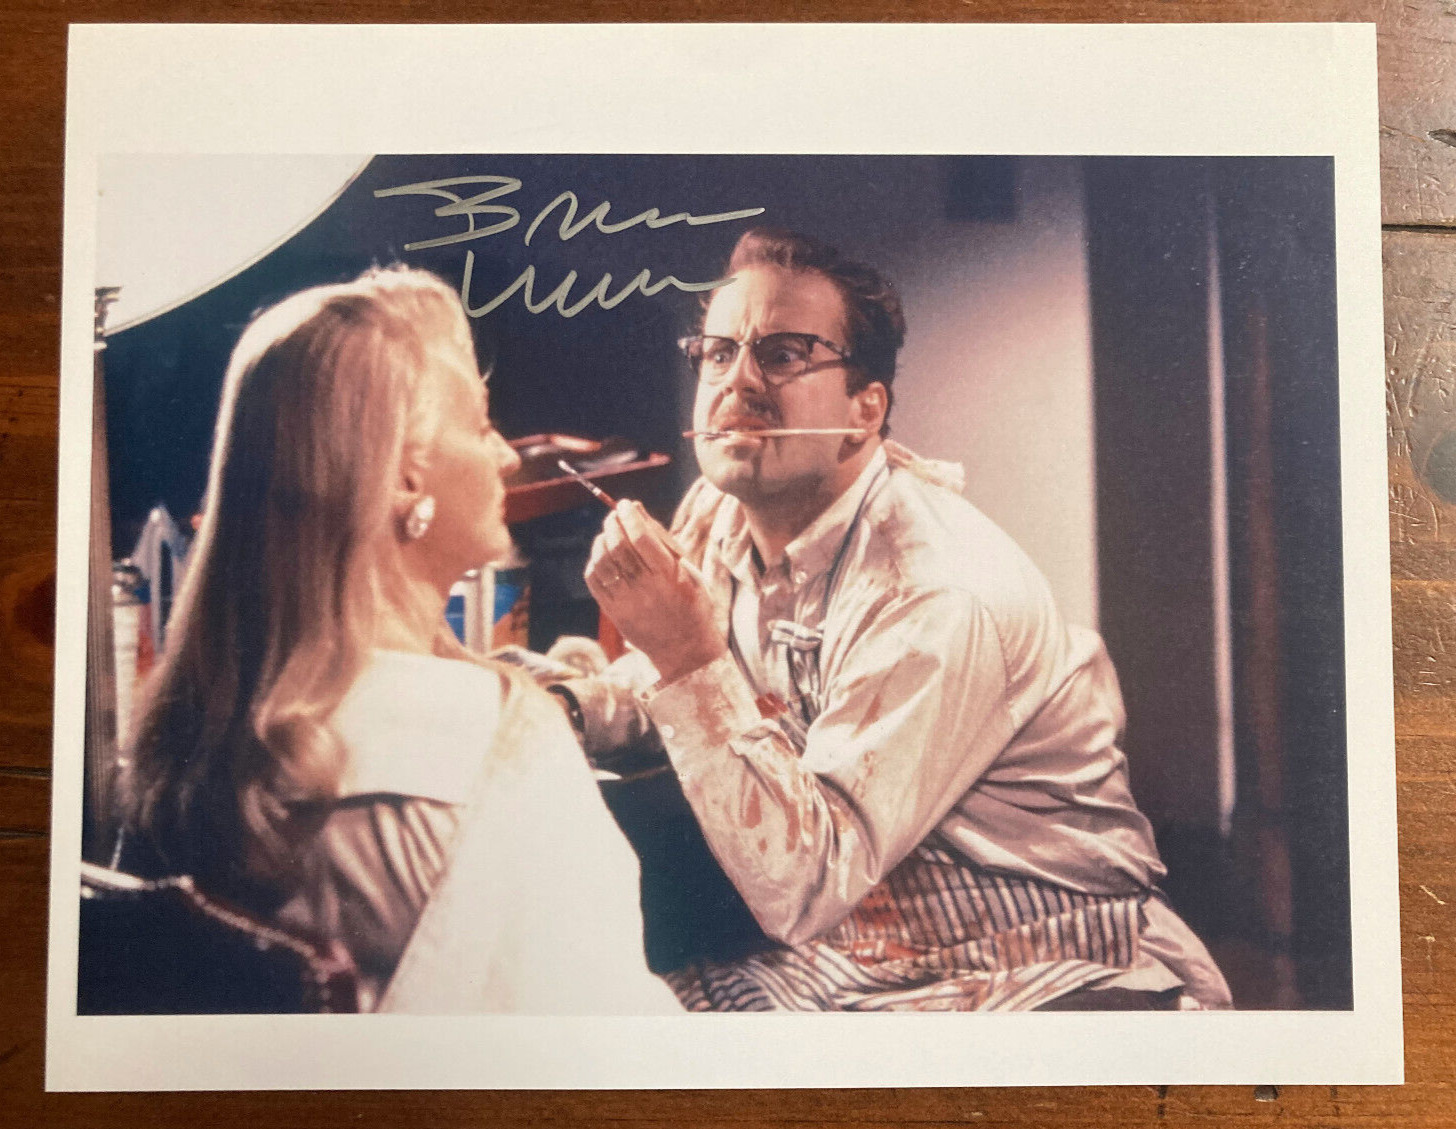 Bruce Willis Signed Autograph Signature 8x10 Glossy Photograph Death Becomes Her